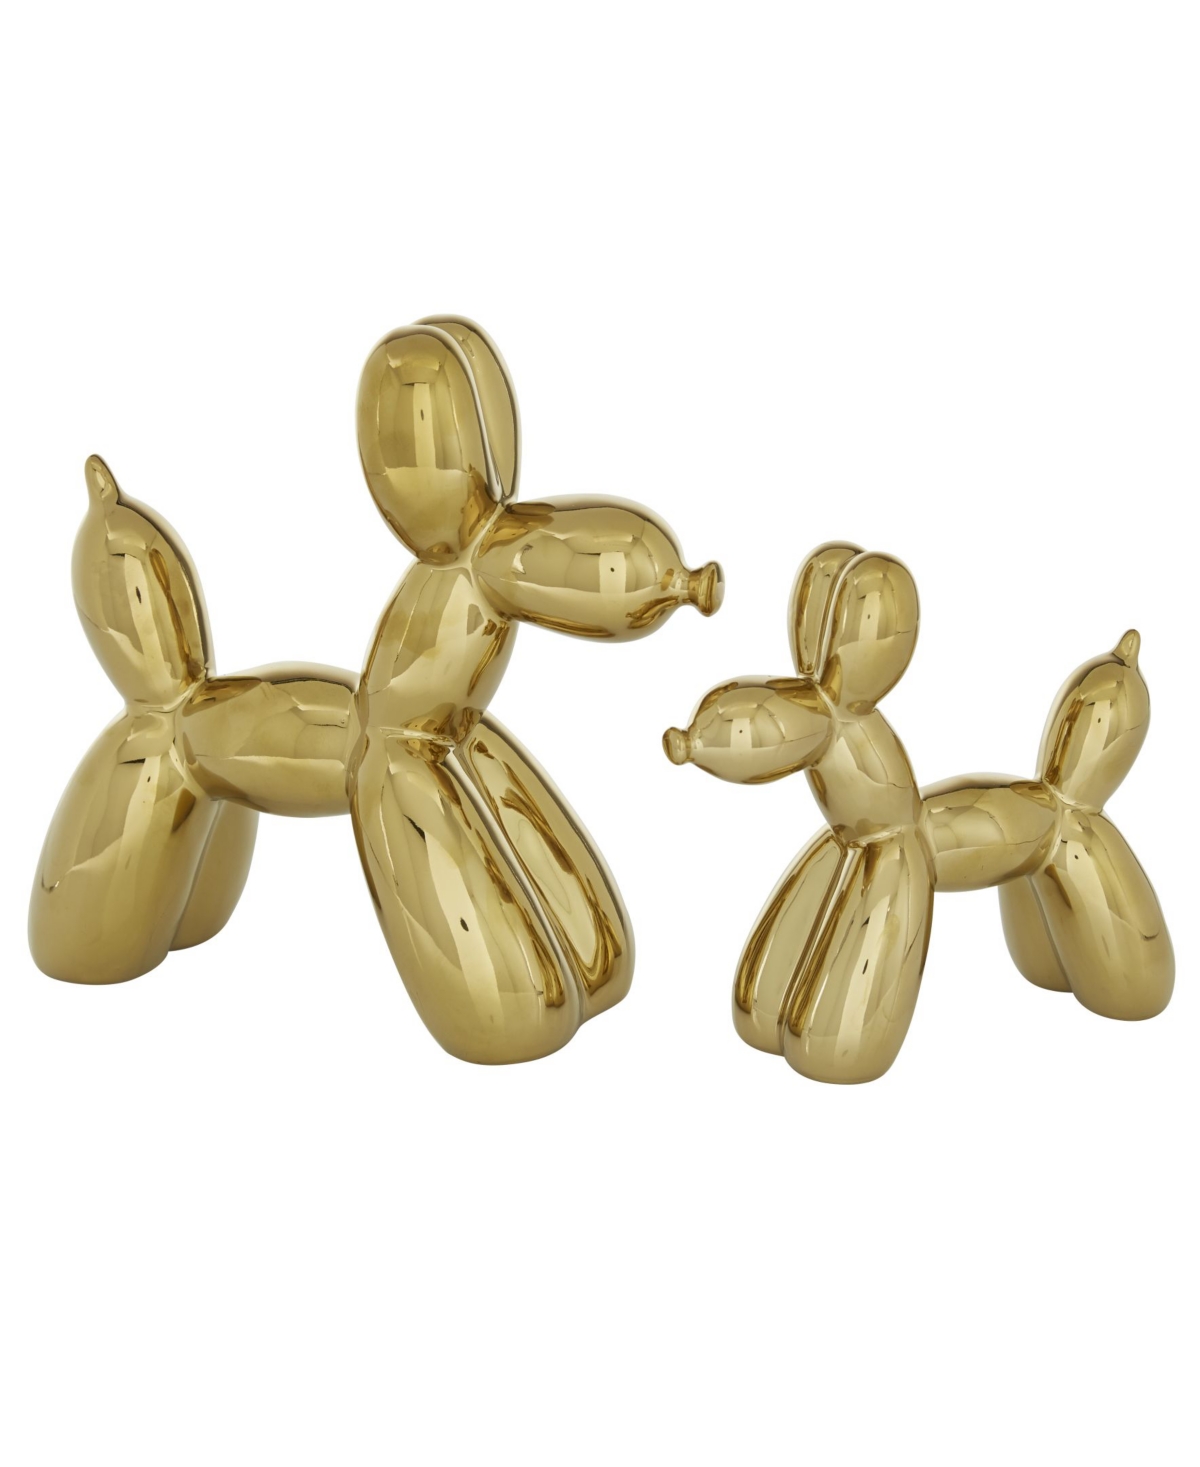 Rosemary Lane Contemporary Dog Sculpture, Set Of 2 In Gold-tone